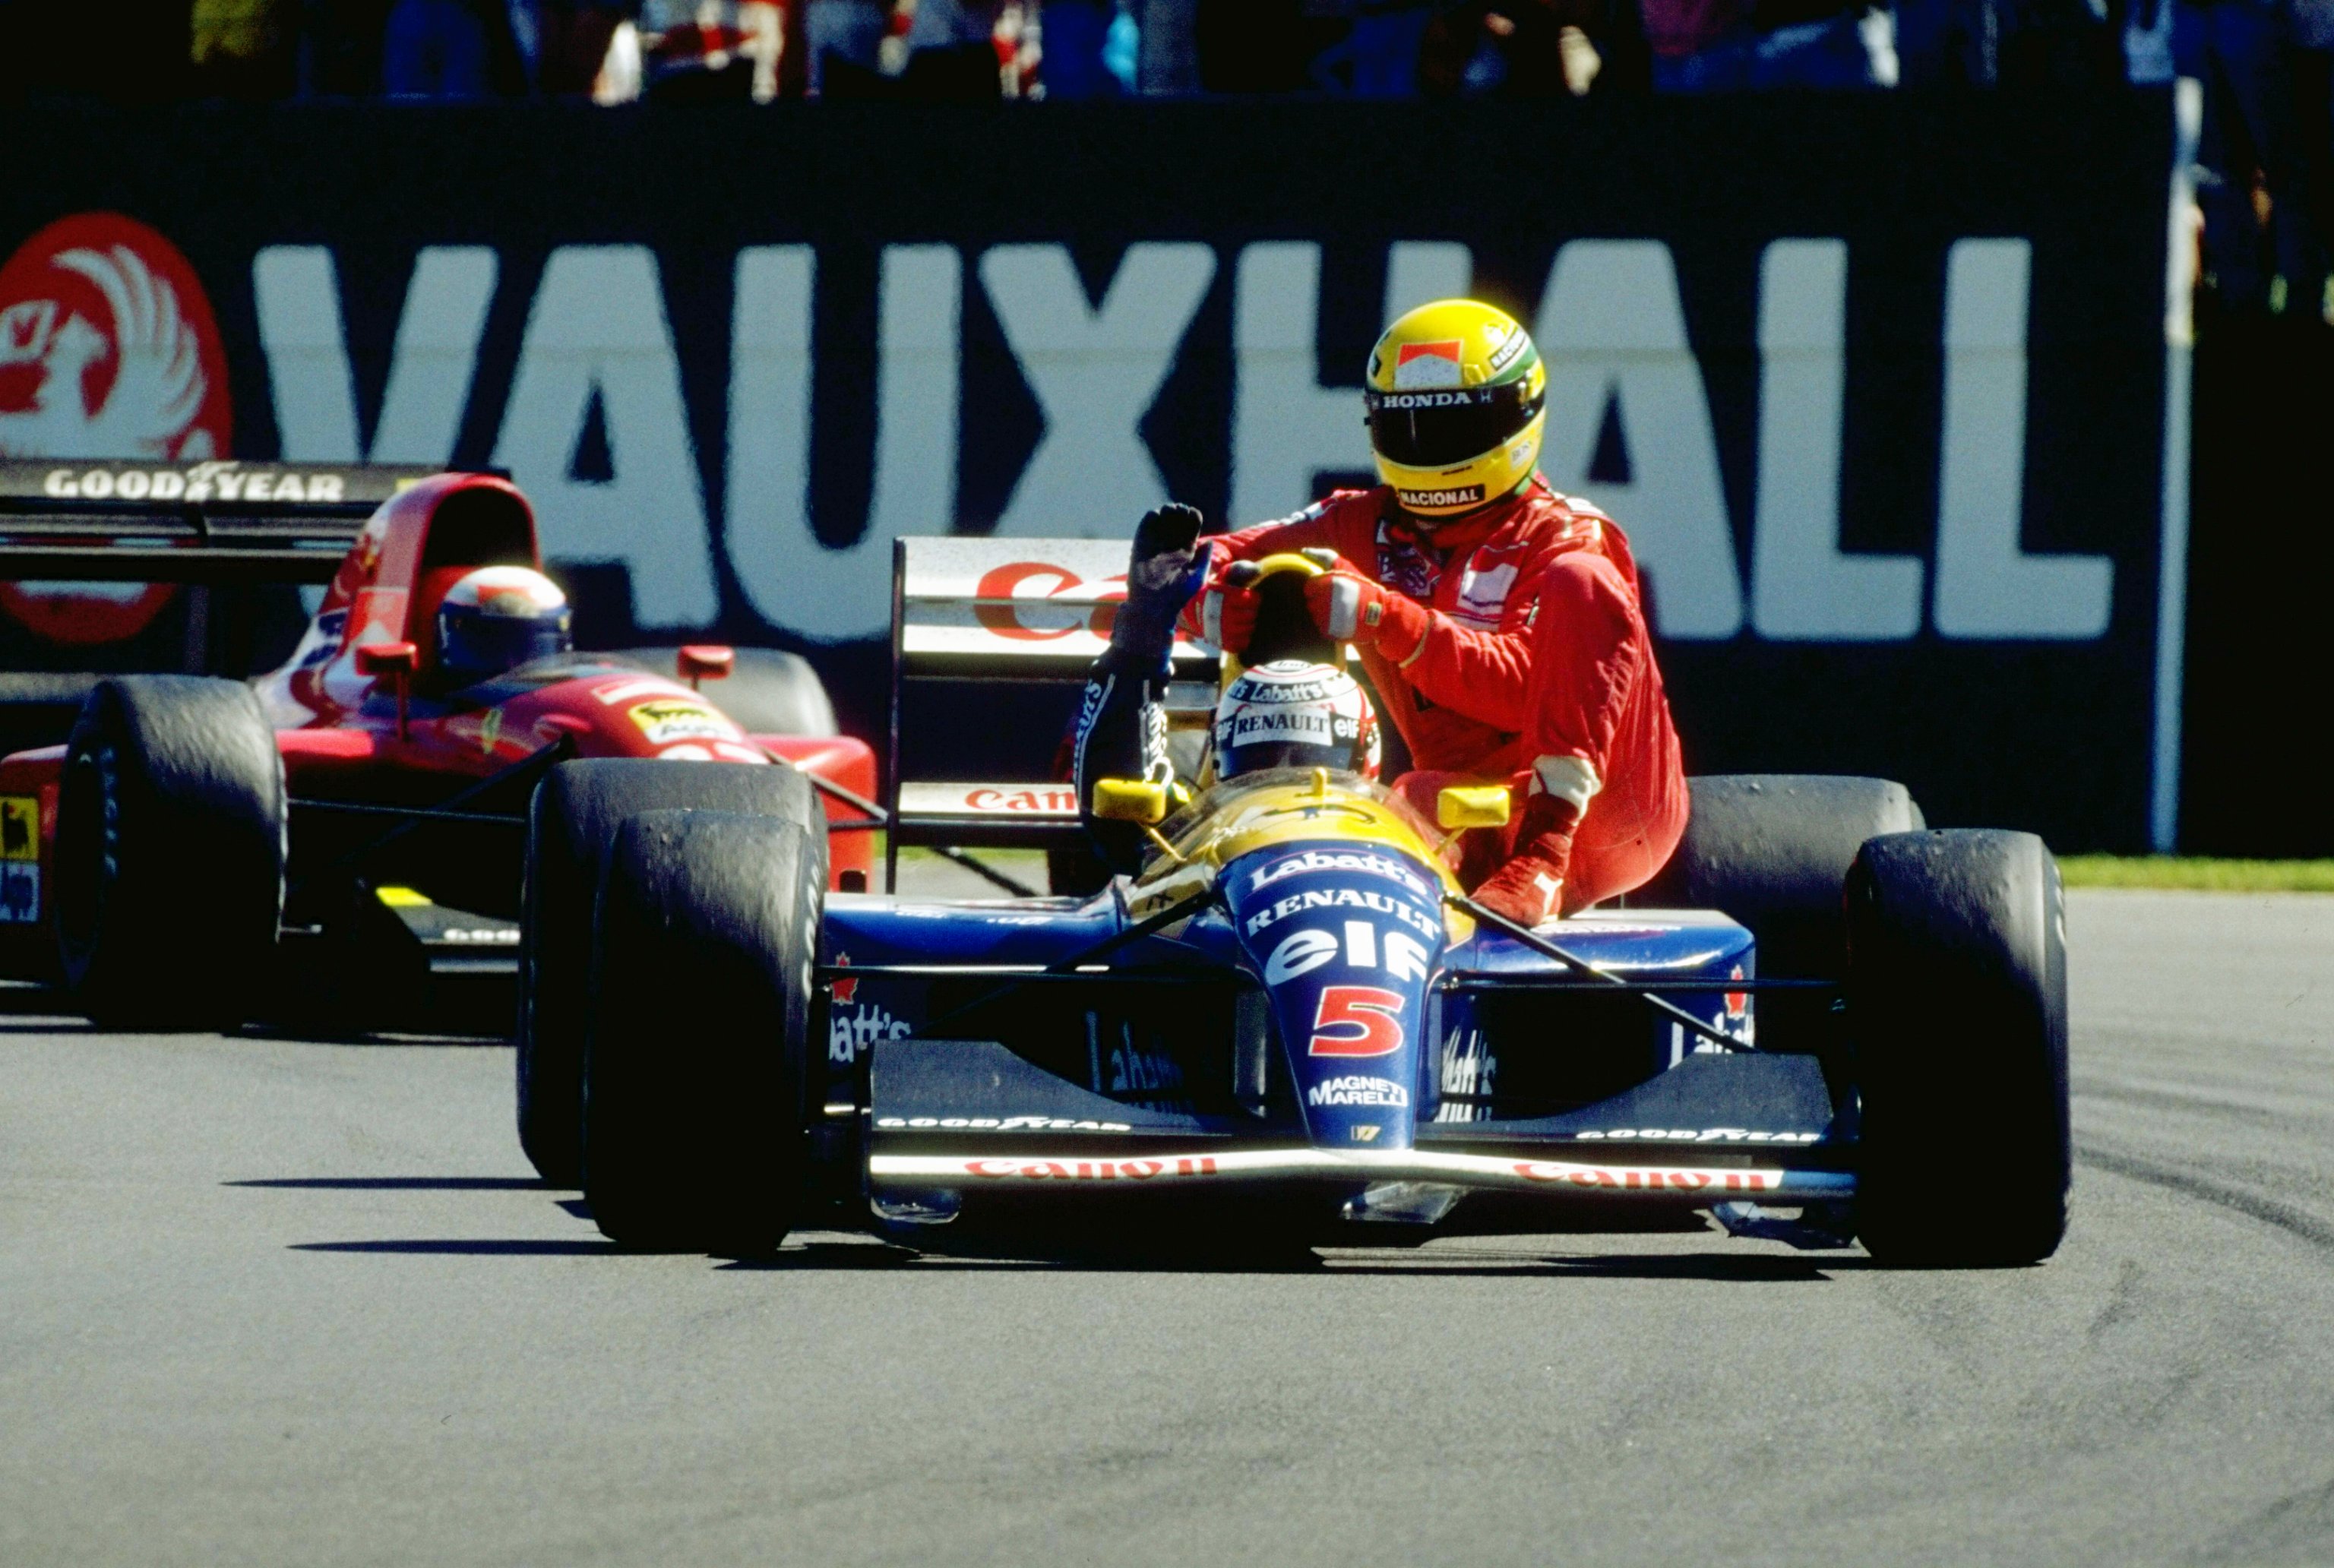 1991:  Williams Renault driver Nigel Mansell of Great Britain gives McLaren Honda driver Ayrton Senna of Brazil a lift home after the British Grand Prix at the Silverstone circuit in England. Mansell finished in first place and Senna retired from the race